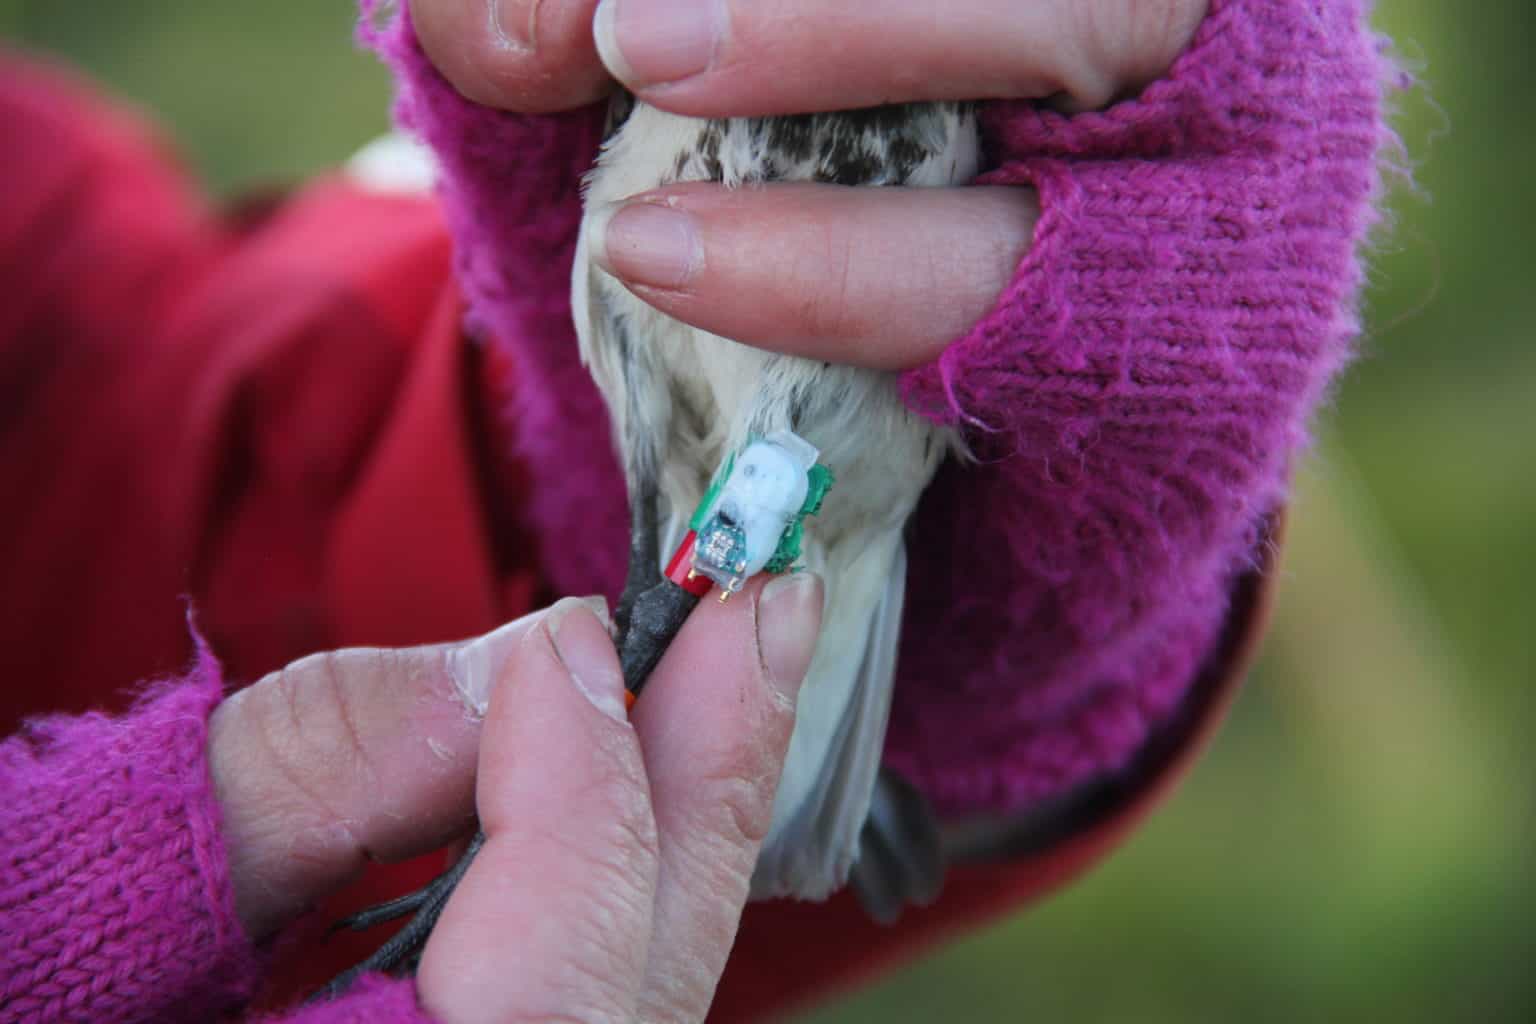 BIRDS REMOVE TRACKING DEVICES